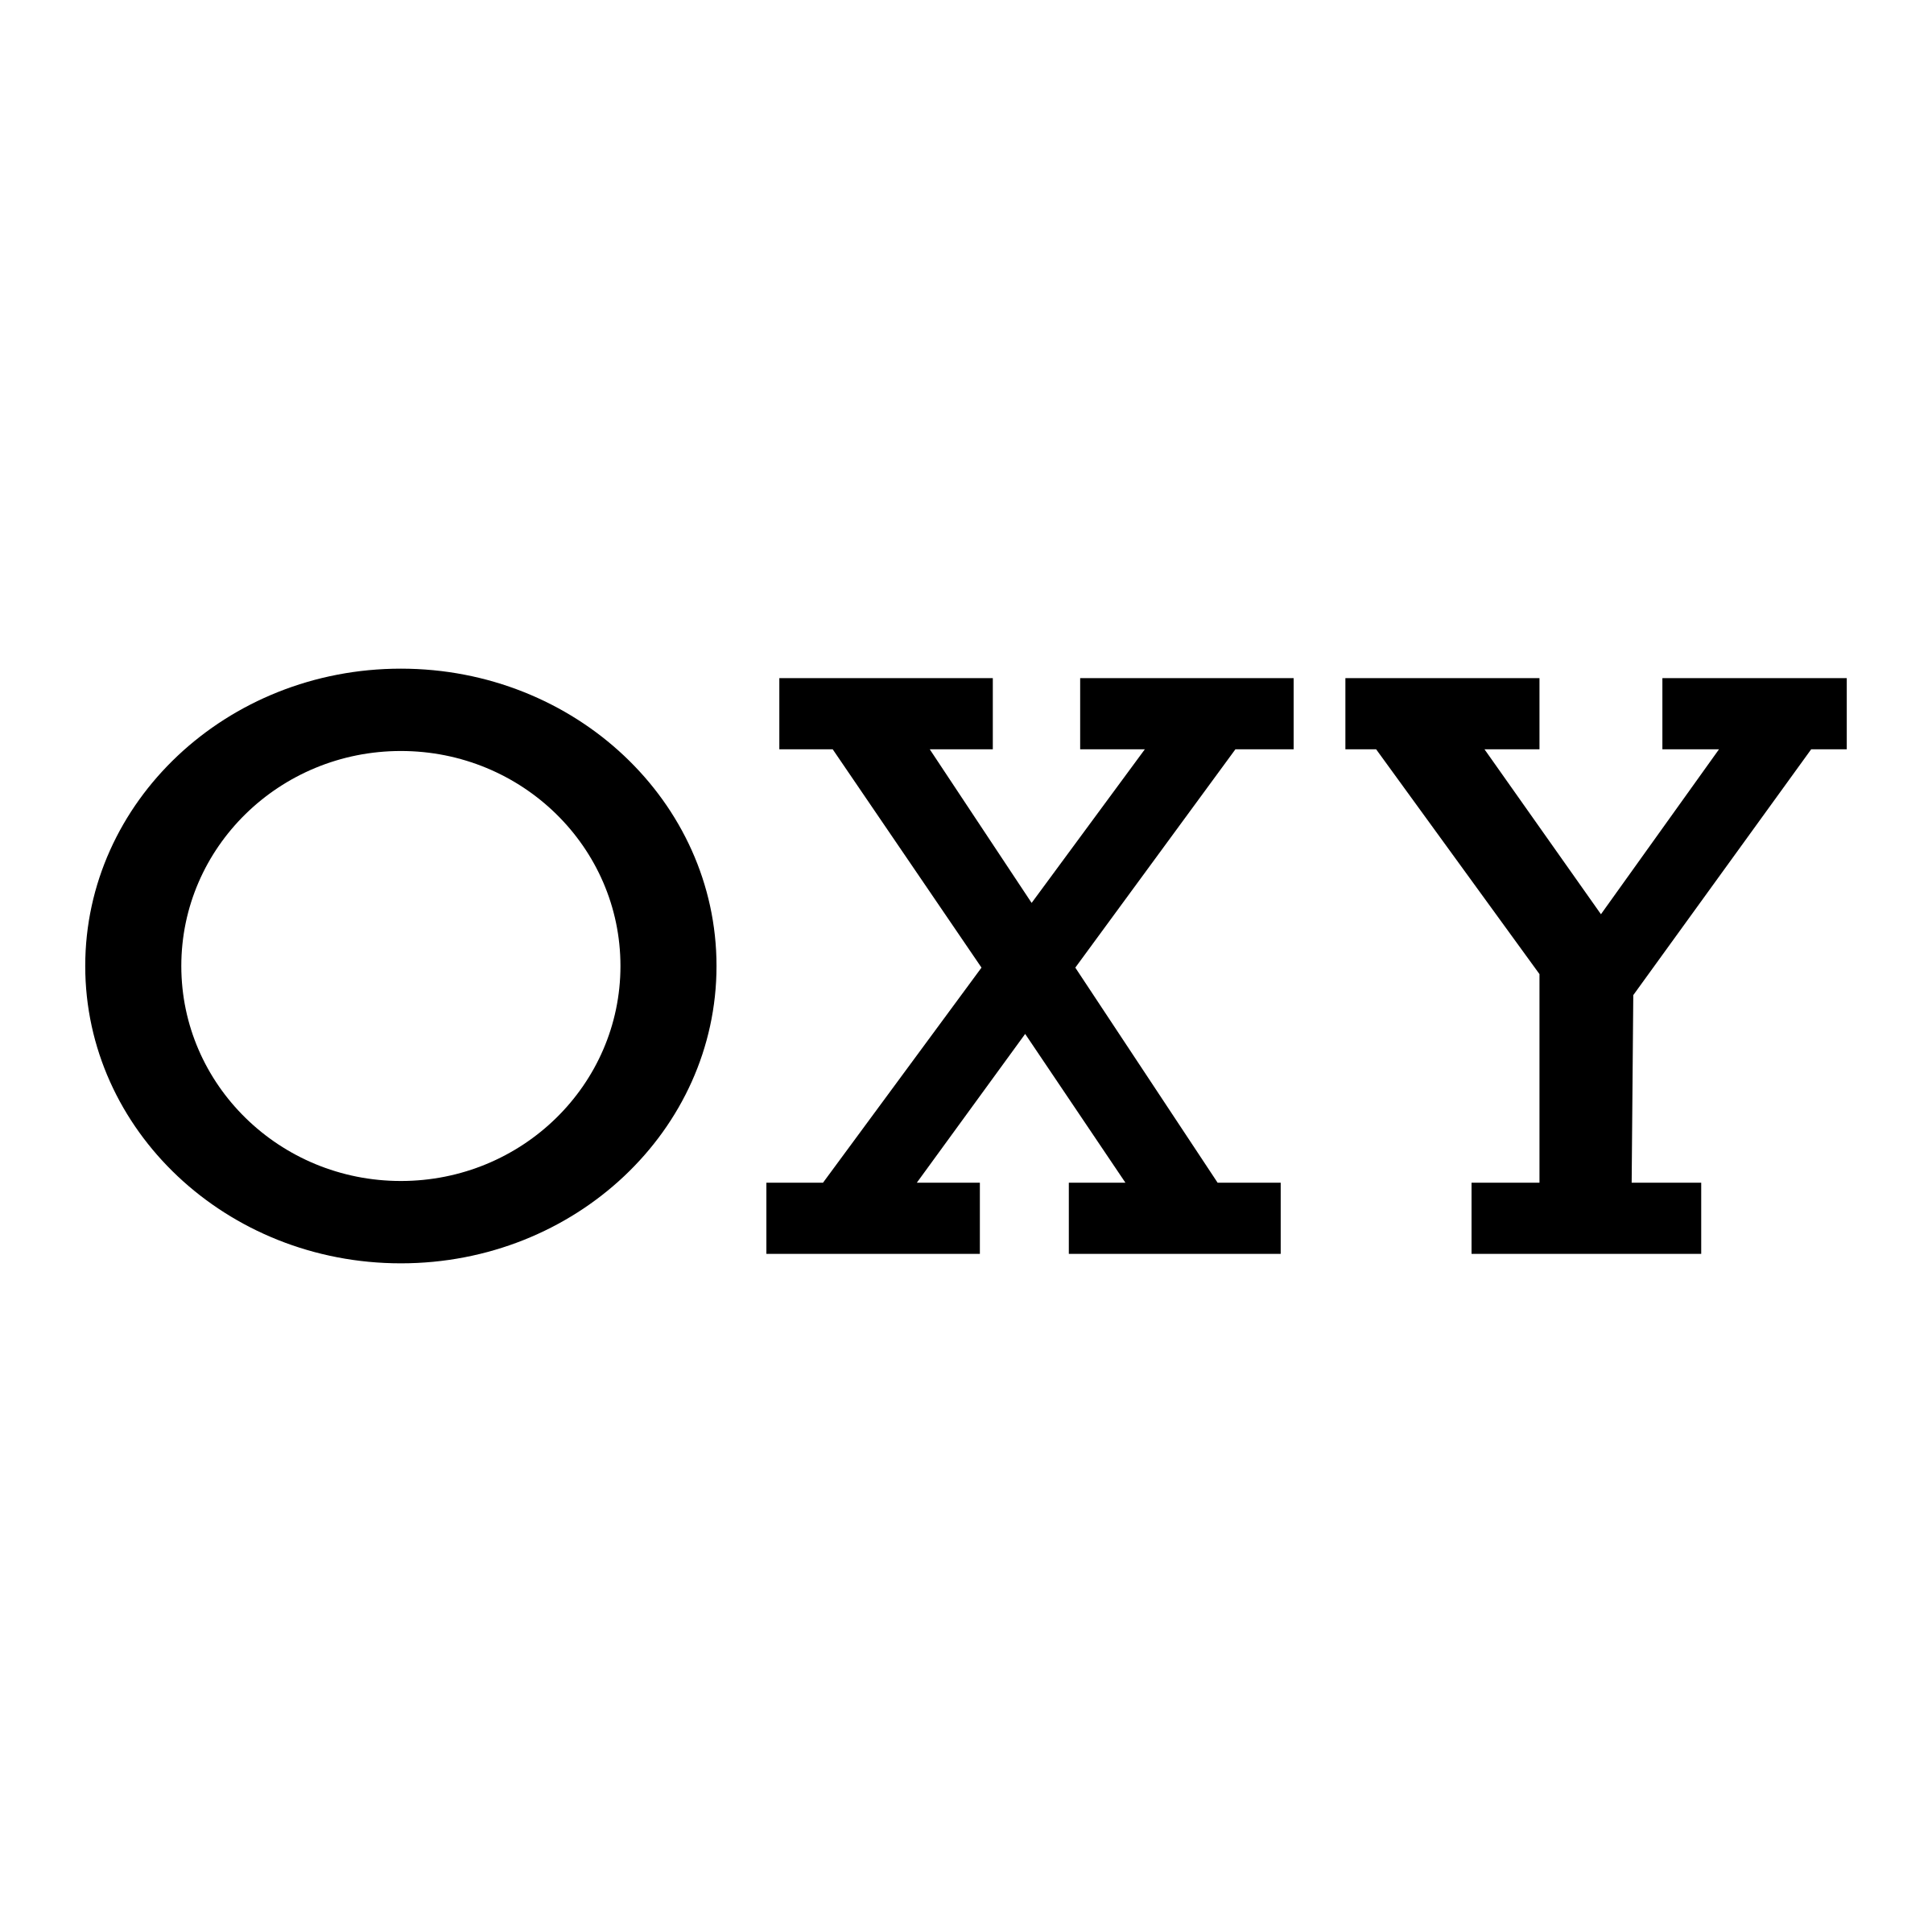 Oxy Logo - Oxy Logo PNG Transparent & SVG Vector - Freebie Supply